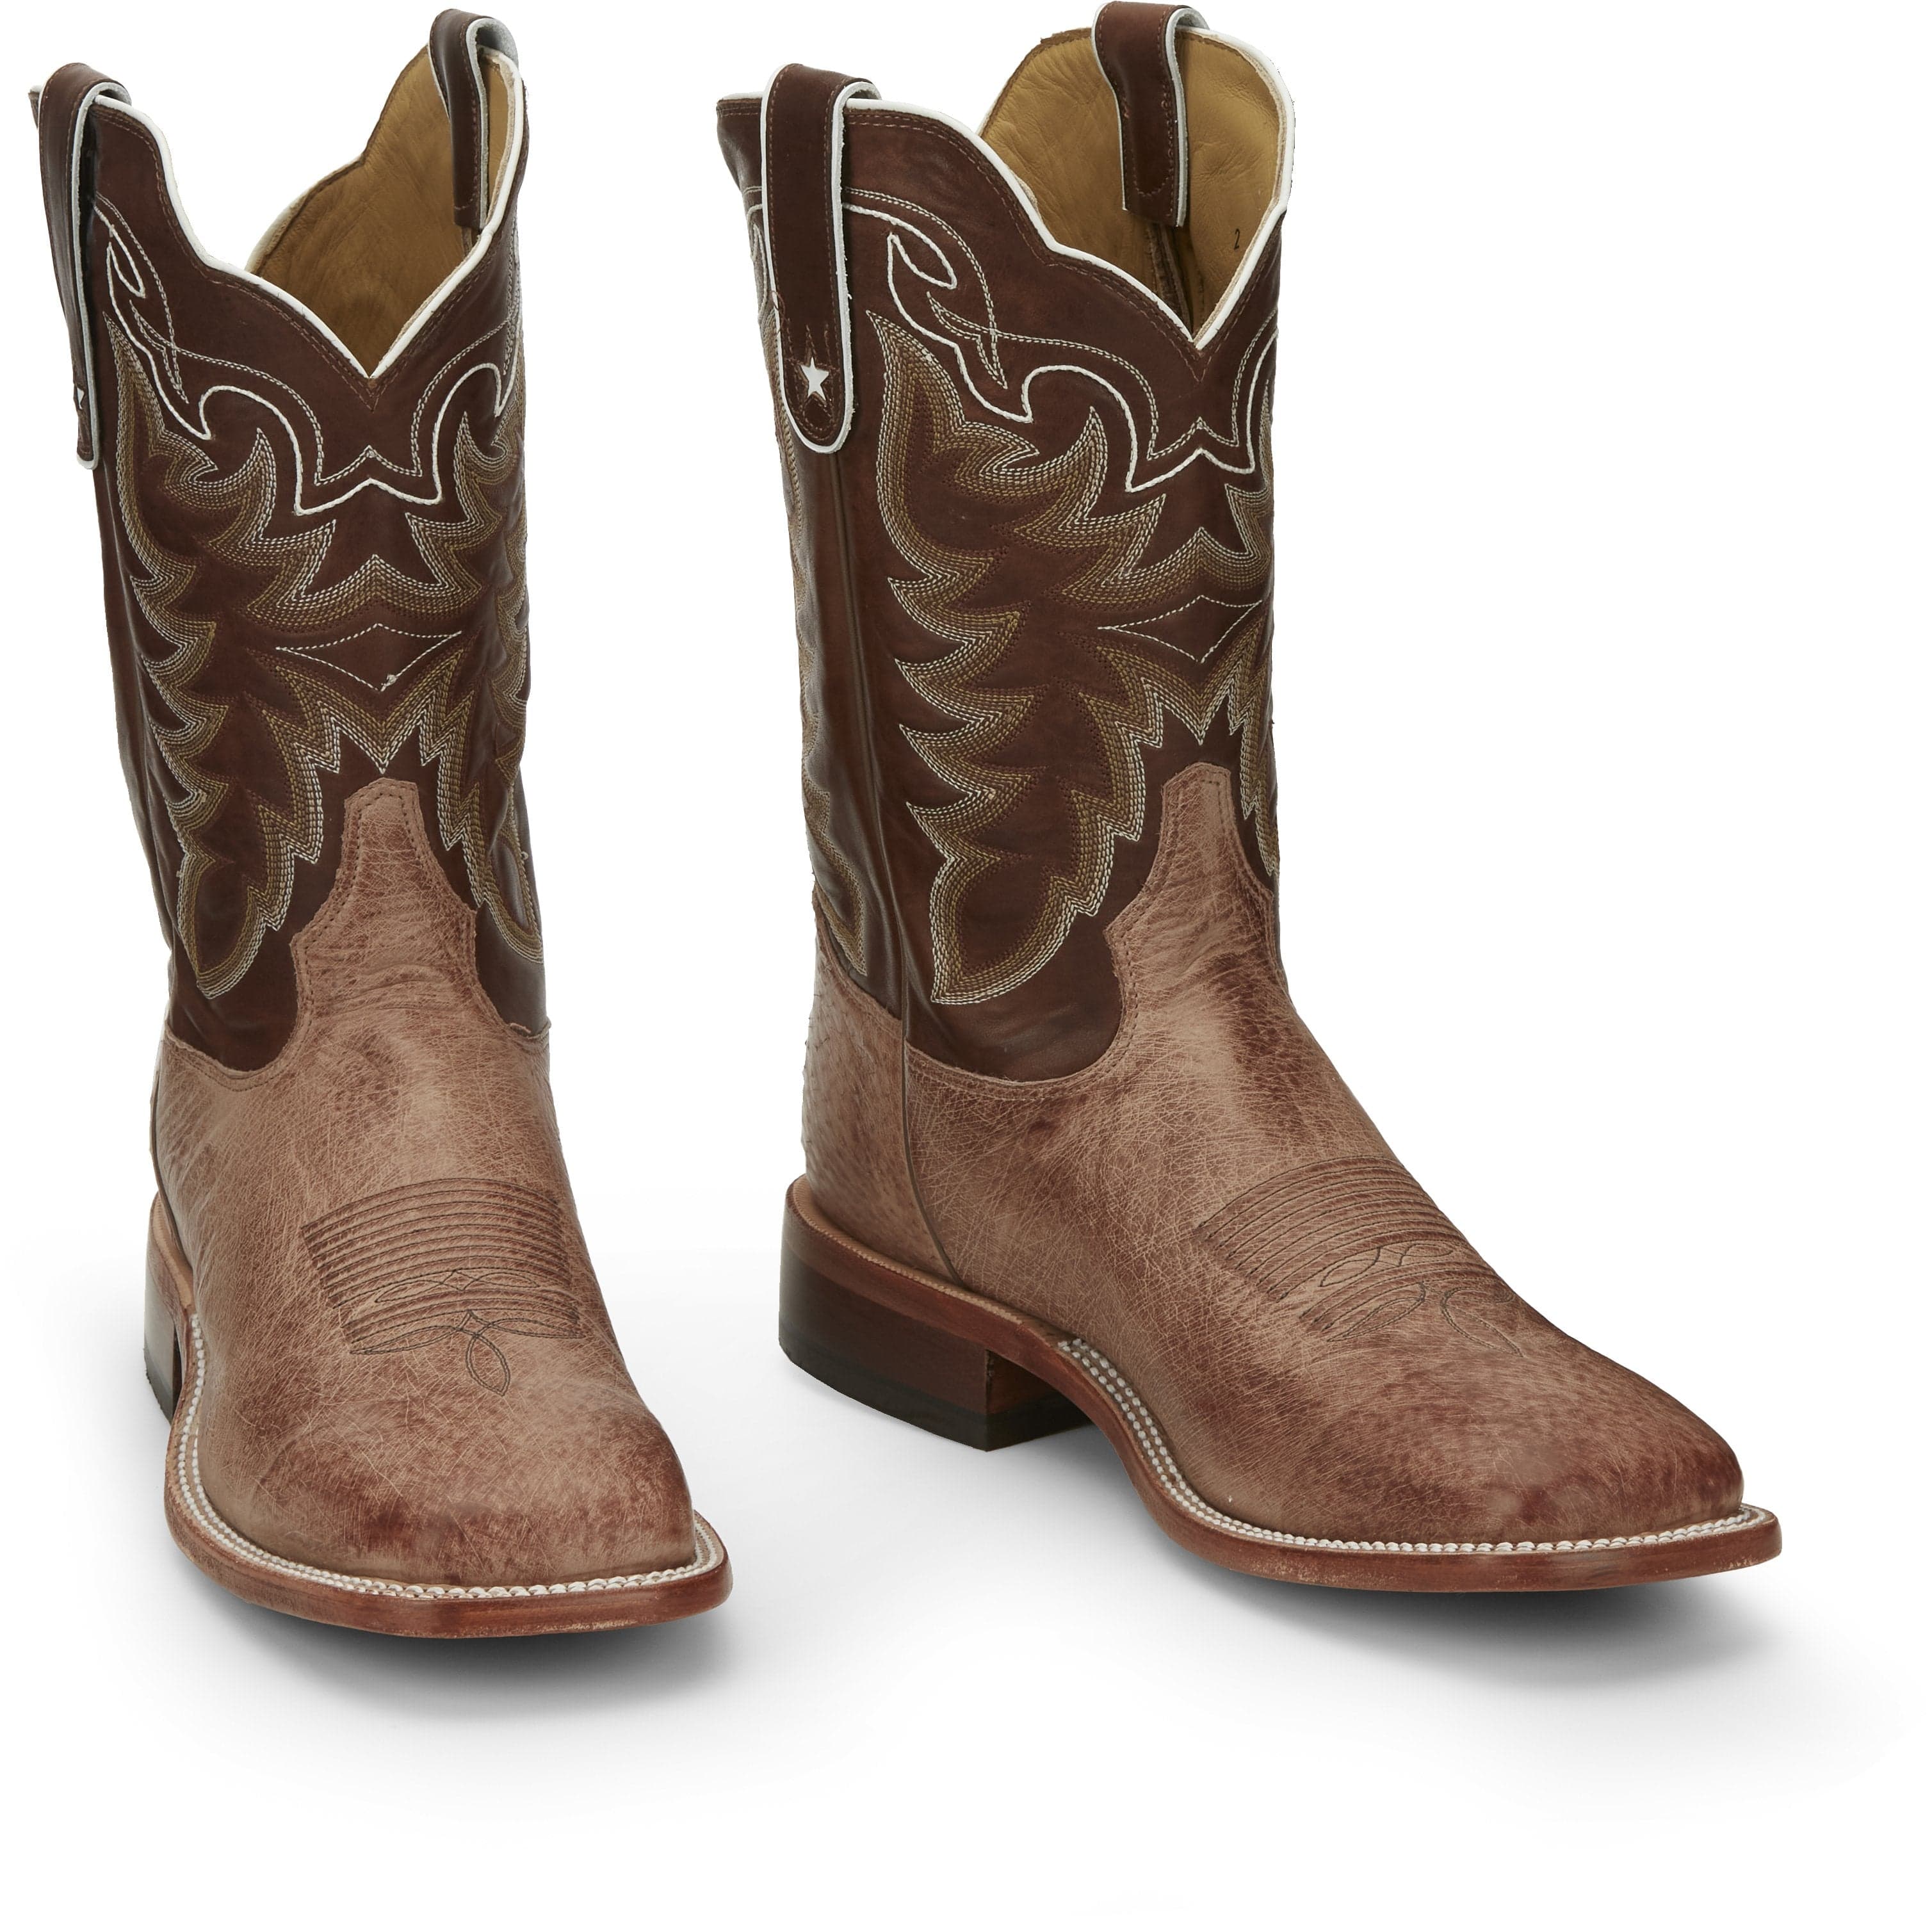 Tony Lama Men's Smooth Ostrich Exotic Boots O4177 - Russell's